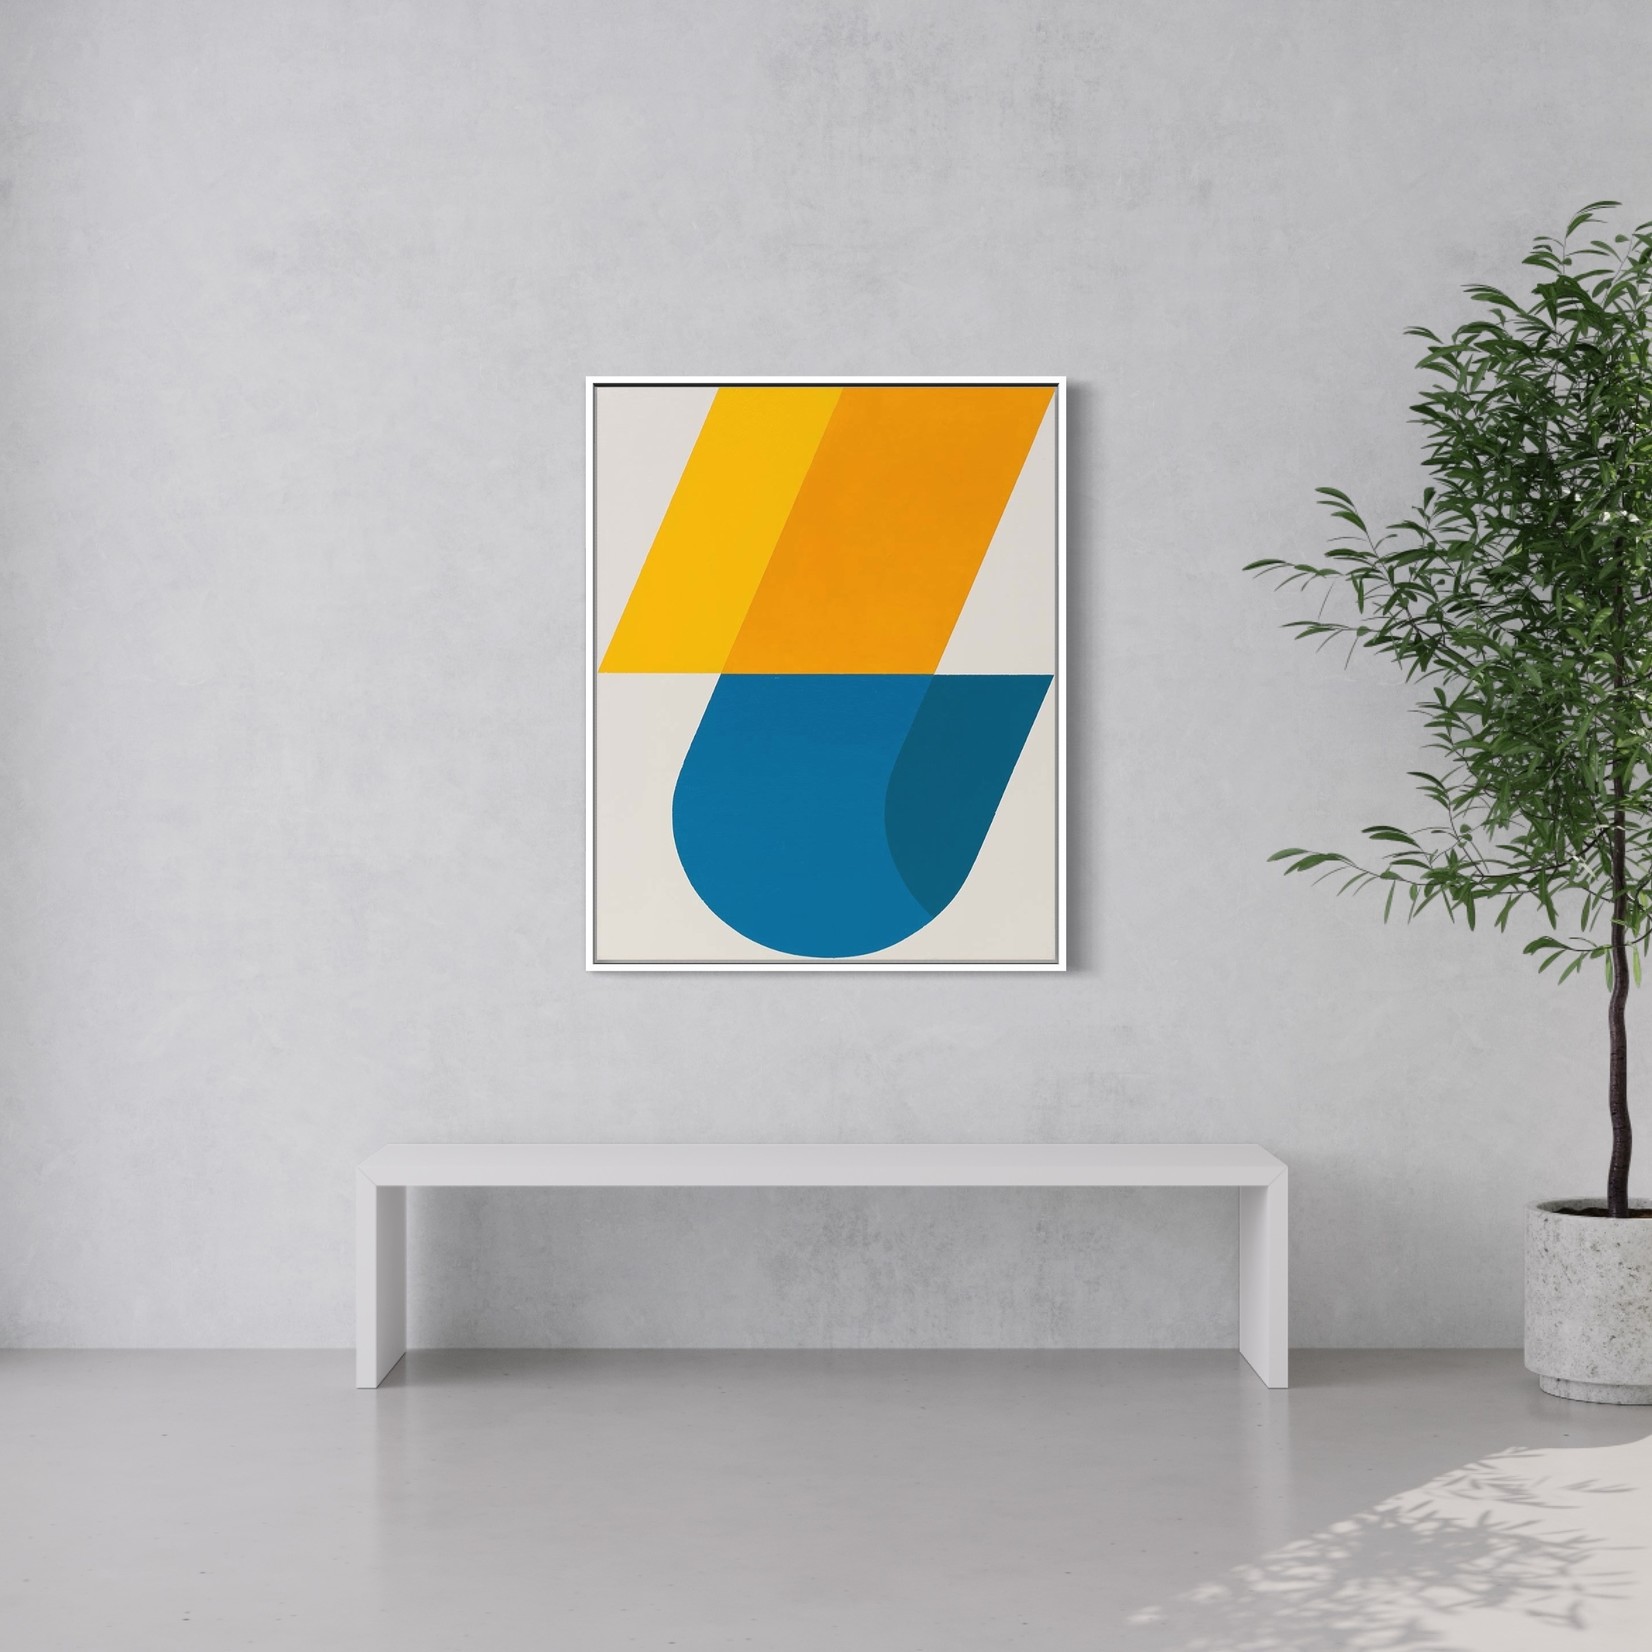 The Picturalist | Stretched Print on Canvas Broken Curve by Rodrigo Martin